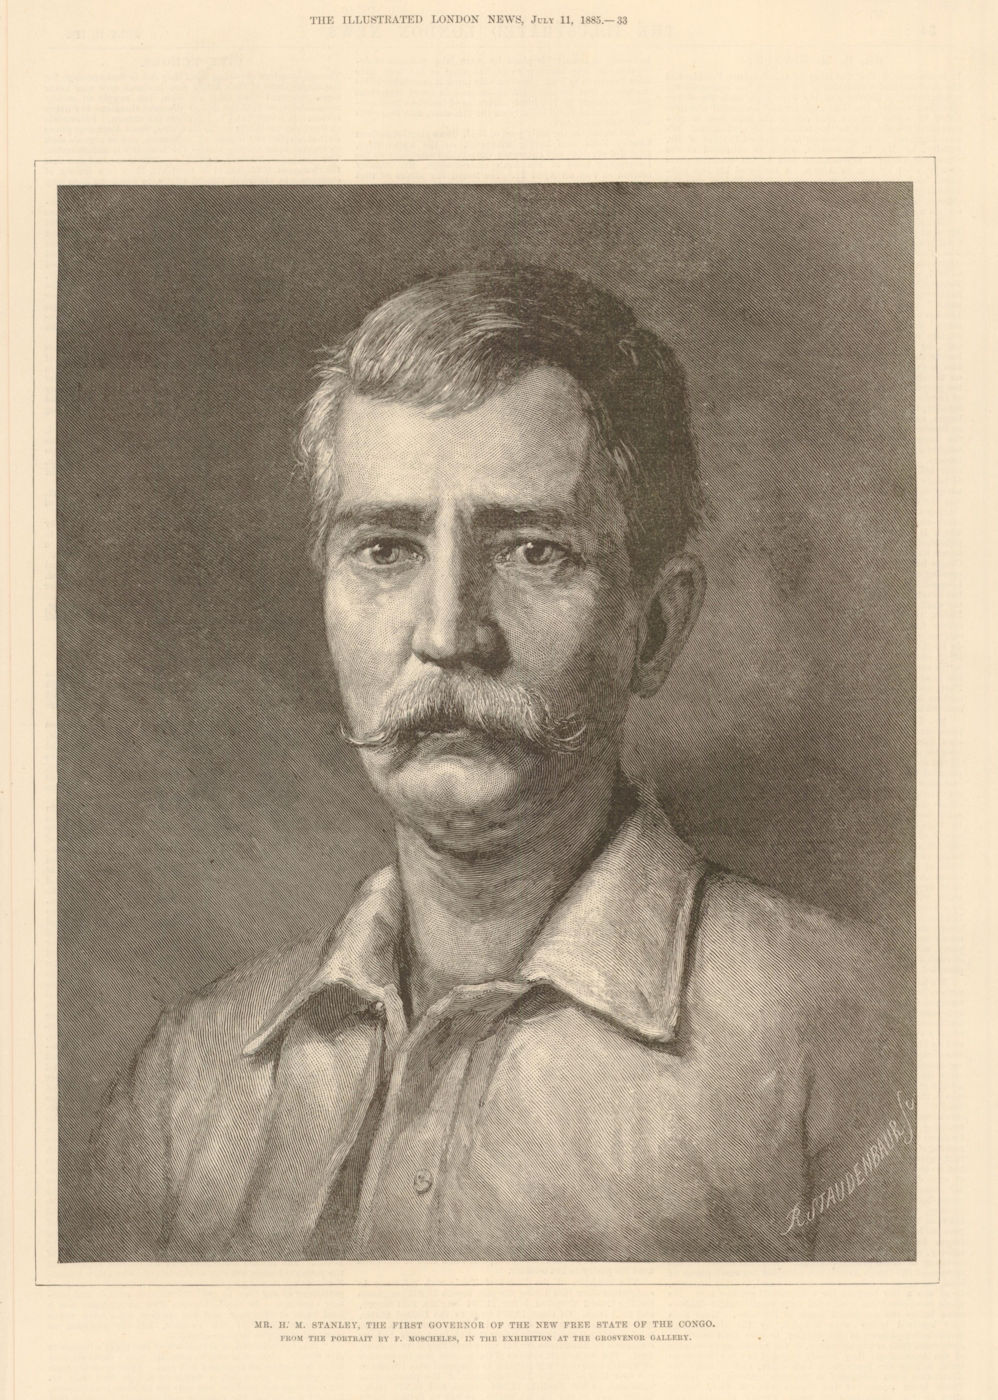 Henry Morton Stanley, first Governor of the new Free State of the Congo 1885